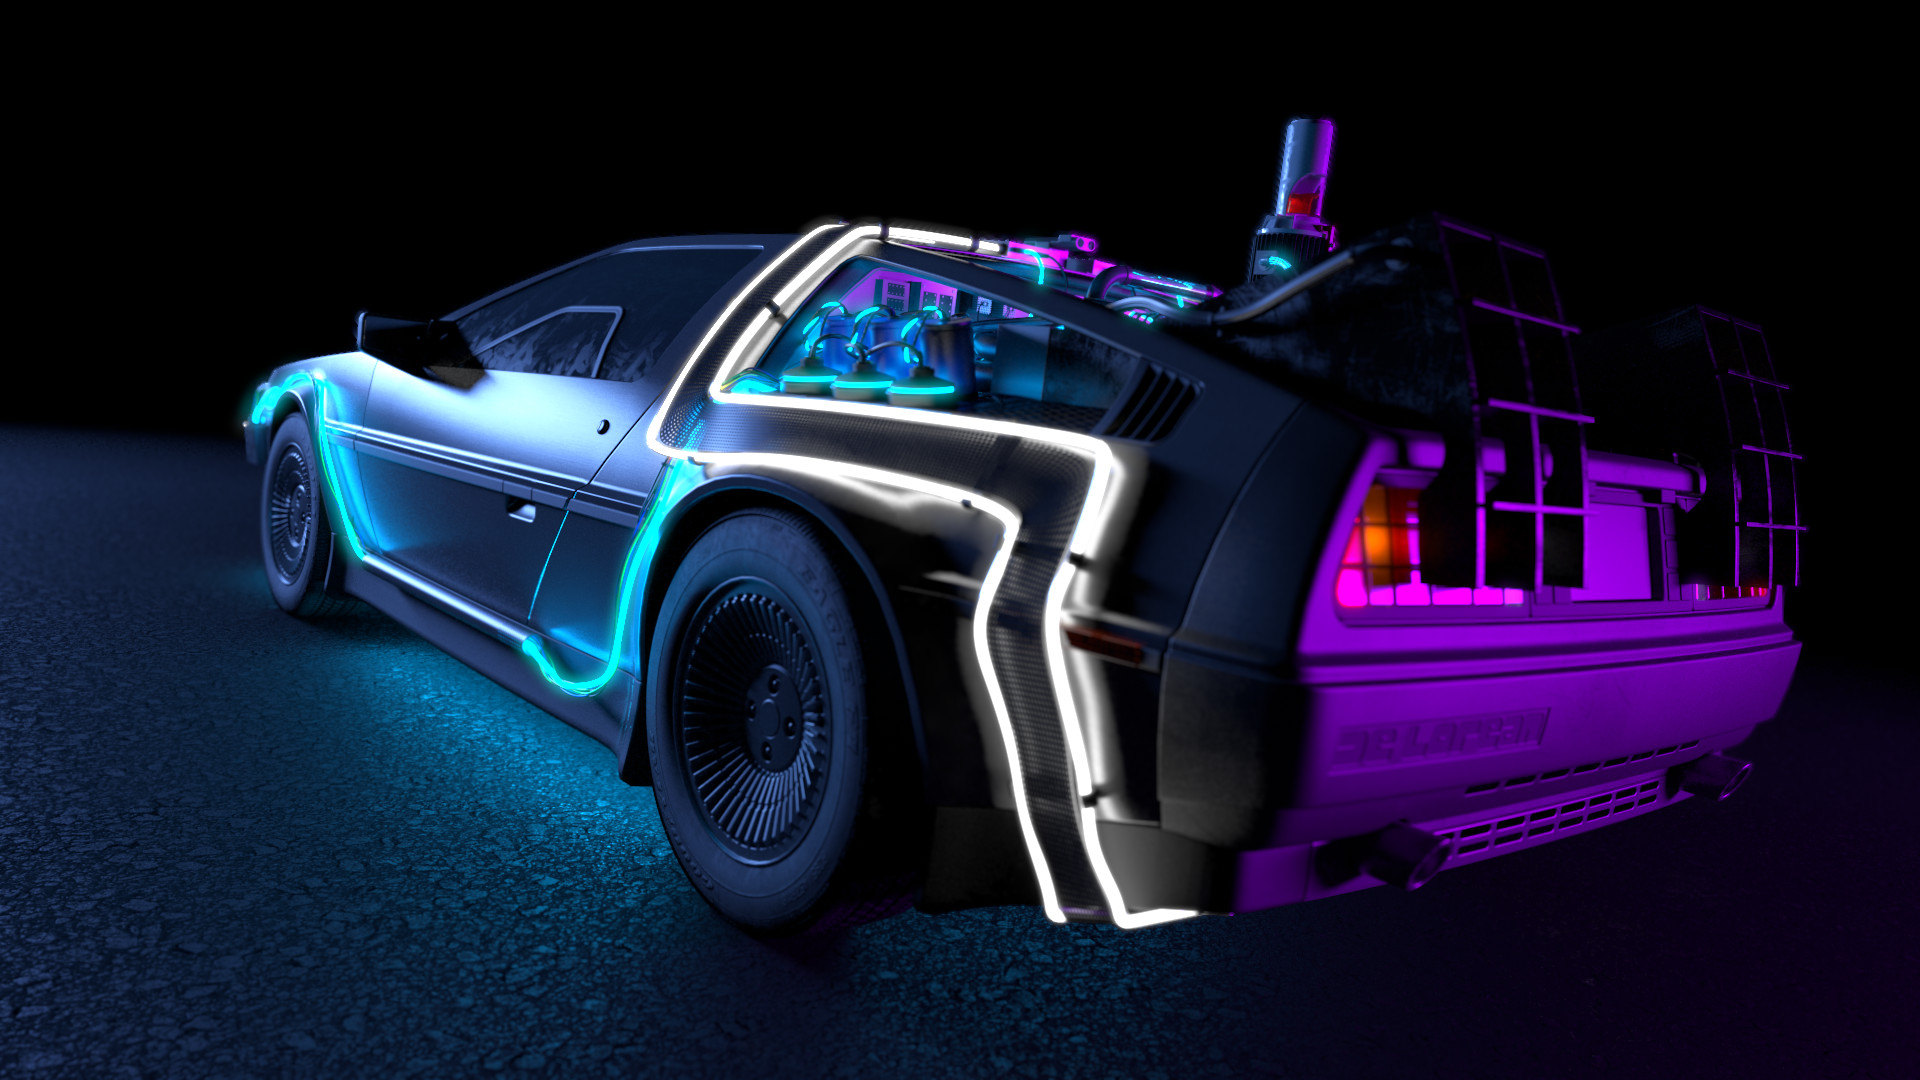 Back To The Future Wallpapers Pictures Images